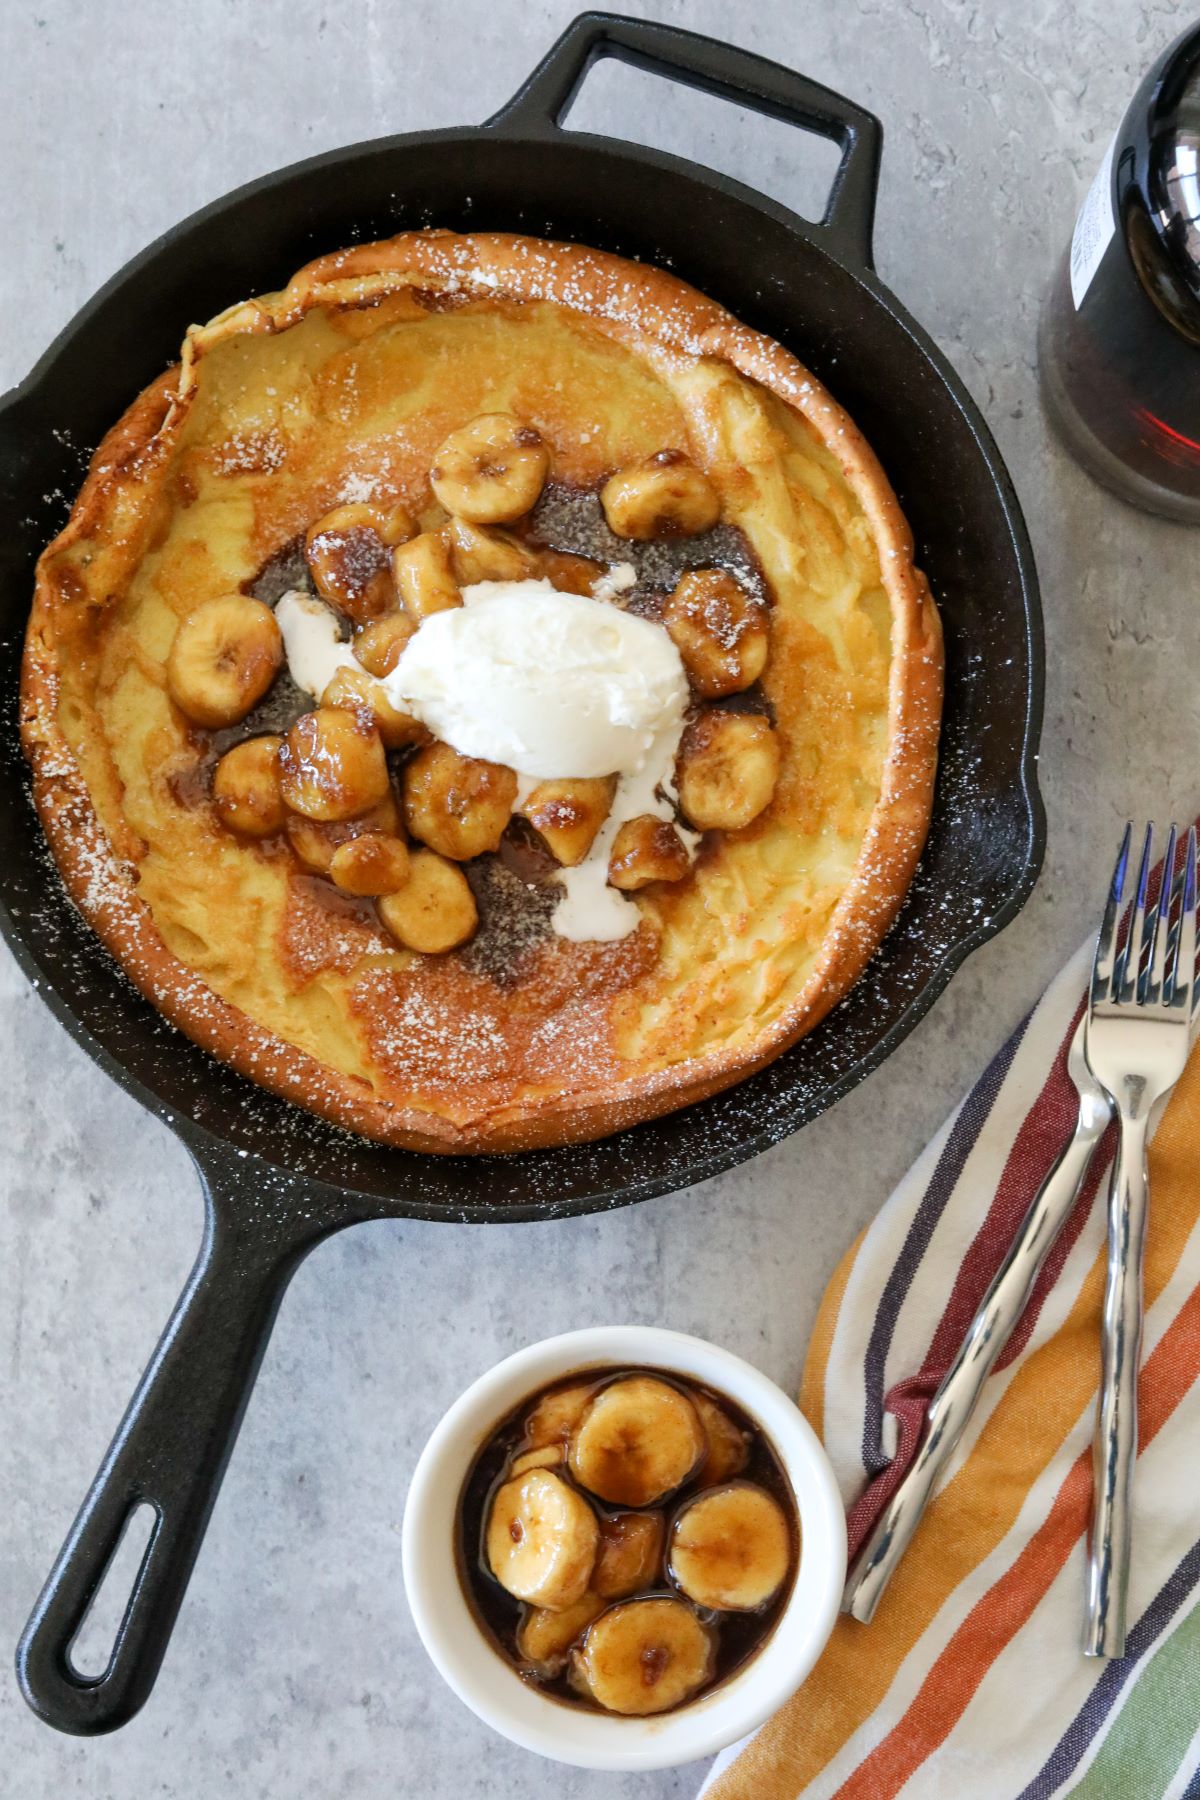 A bananas foster Dutch baby ready to serve